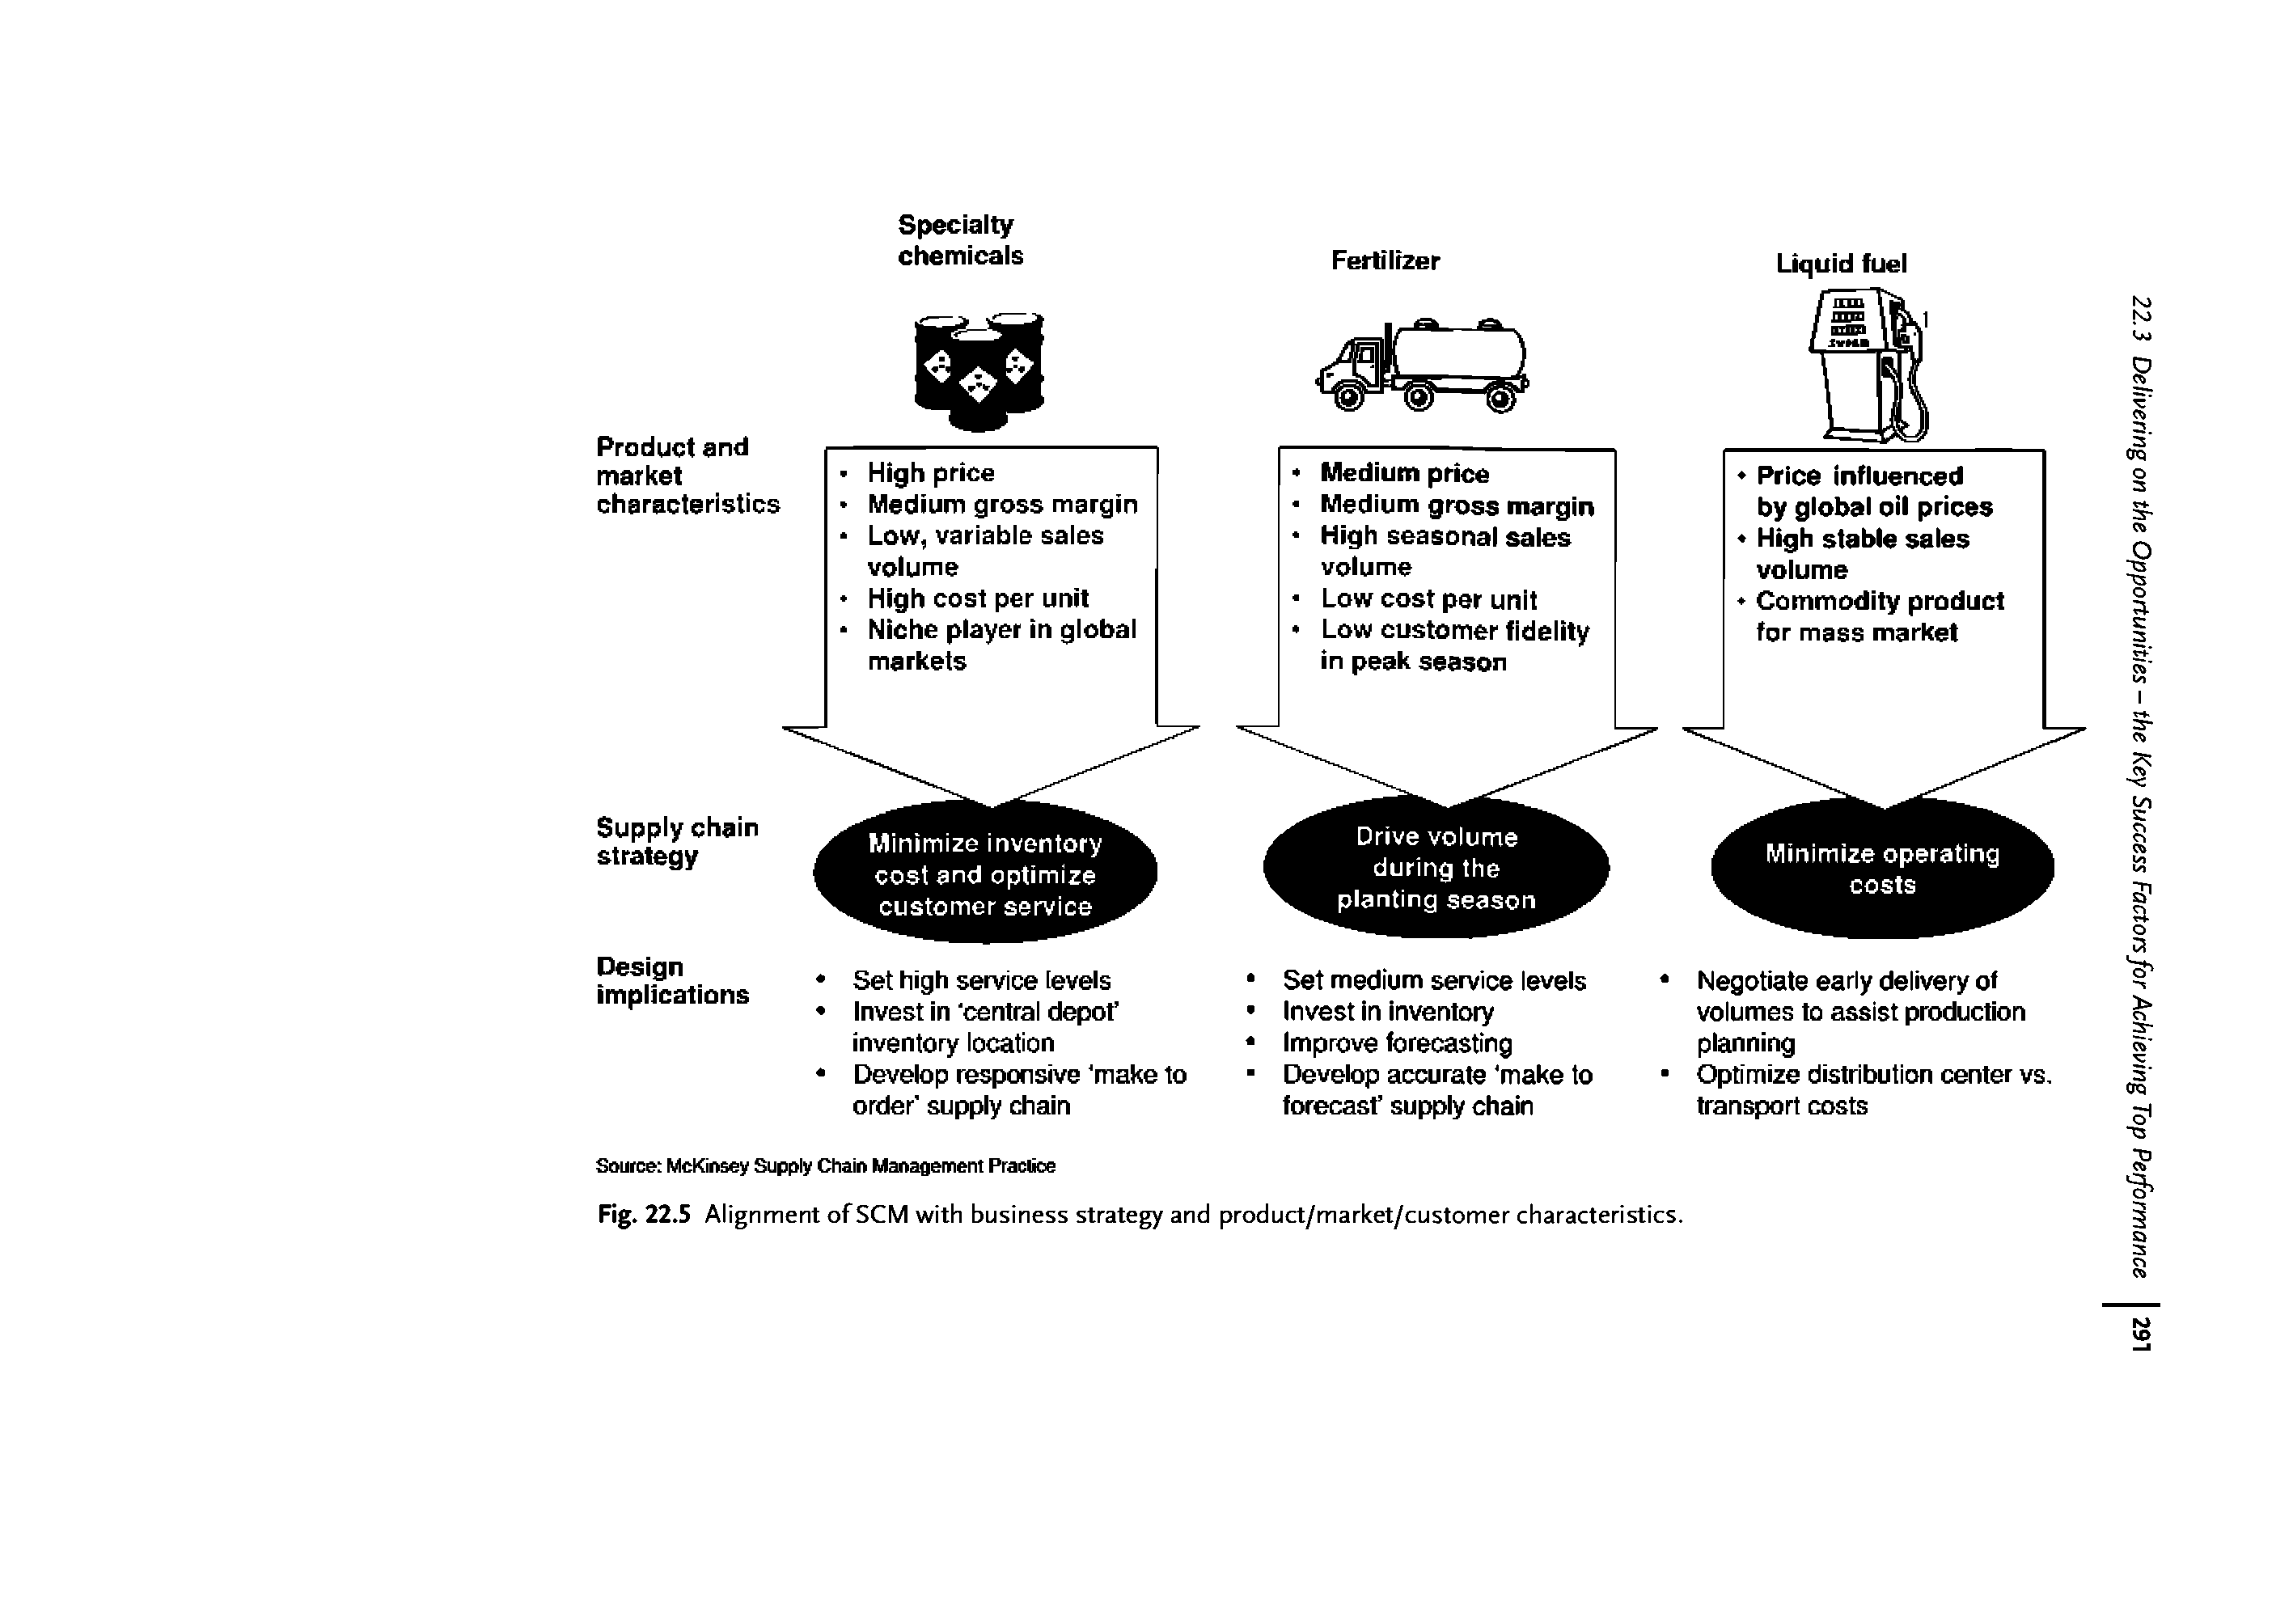 Fig. 22.5 Alignment of SCM with business strategy and product/market/customer characteristics.